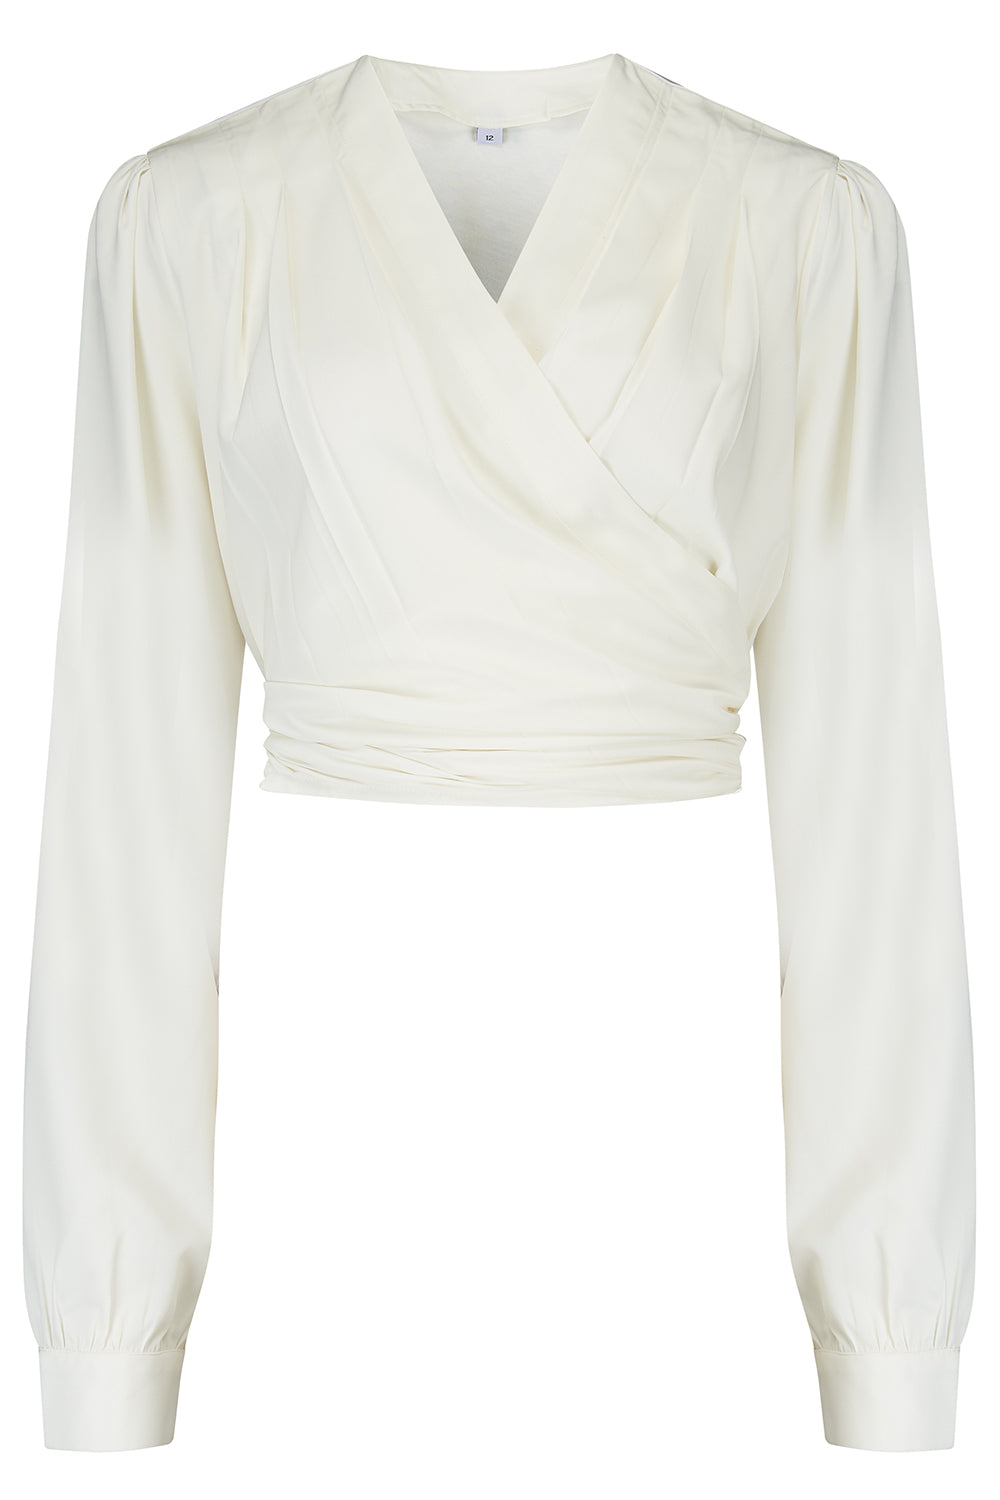 The "Darla" Long Sleeve Wrap Blouse in Antique White, True Vintage Style - True and authentic vintage style clothing, inspired by the Classic styles of CC41 , WW2 and the fun 1950s RocknRoll era, for everyday wear plus events like Goodwood Revival, Twinwood Festival and Viva Las Vegas Rockabilly Weekend Rock n Romance Rock n Romance